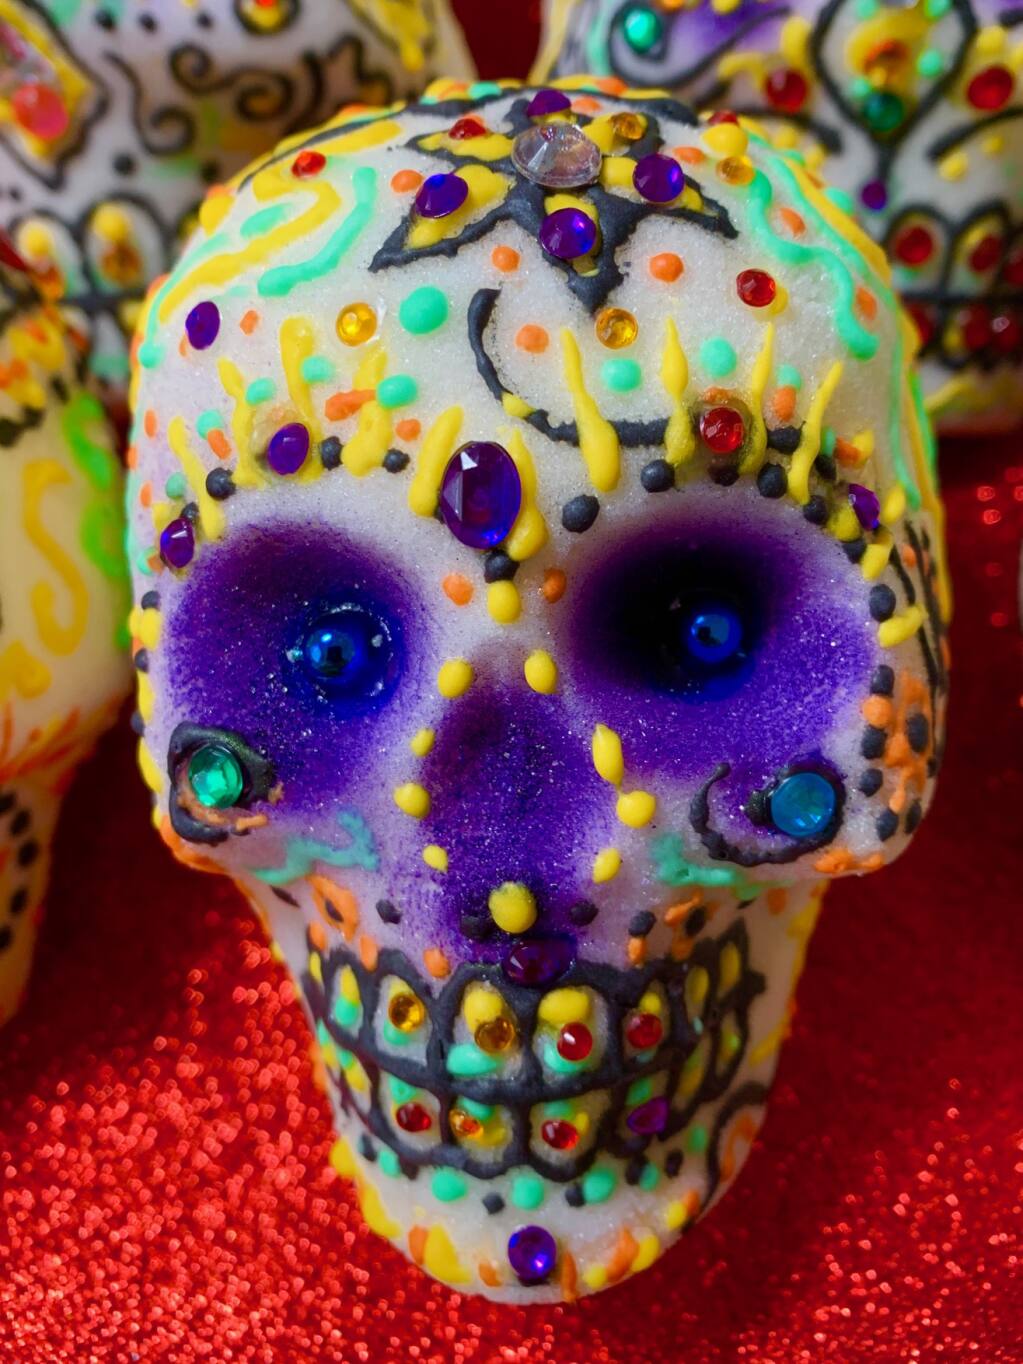 Artist Diego Marcial Rios teaches the art of decorating sugar skulls for Day of the Dead. (Diego Marcial Rios)